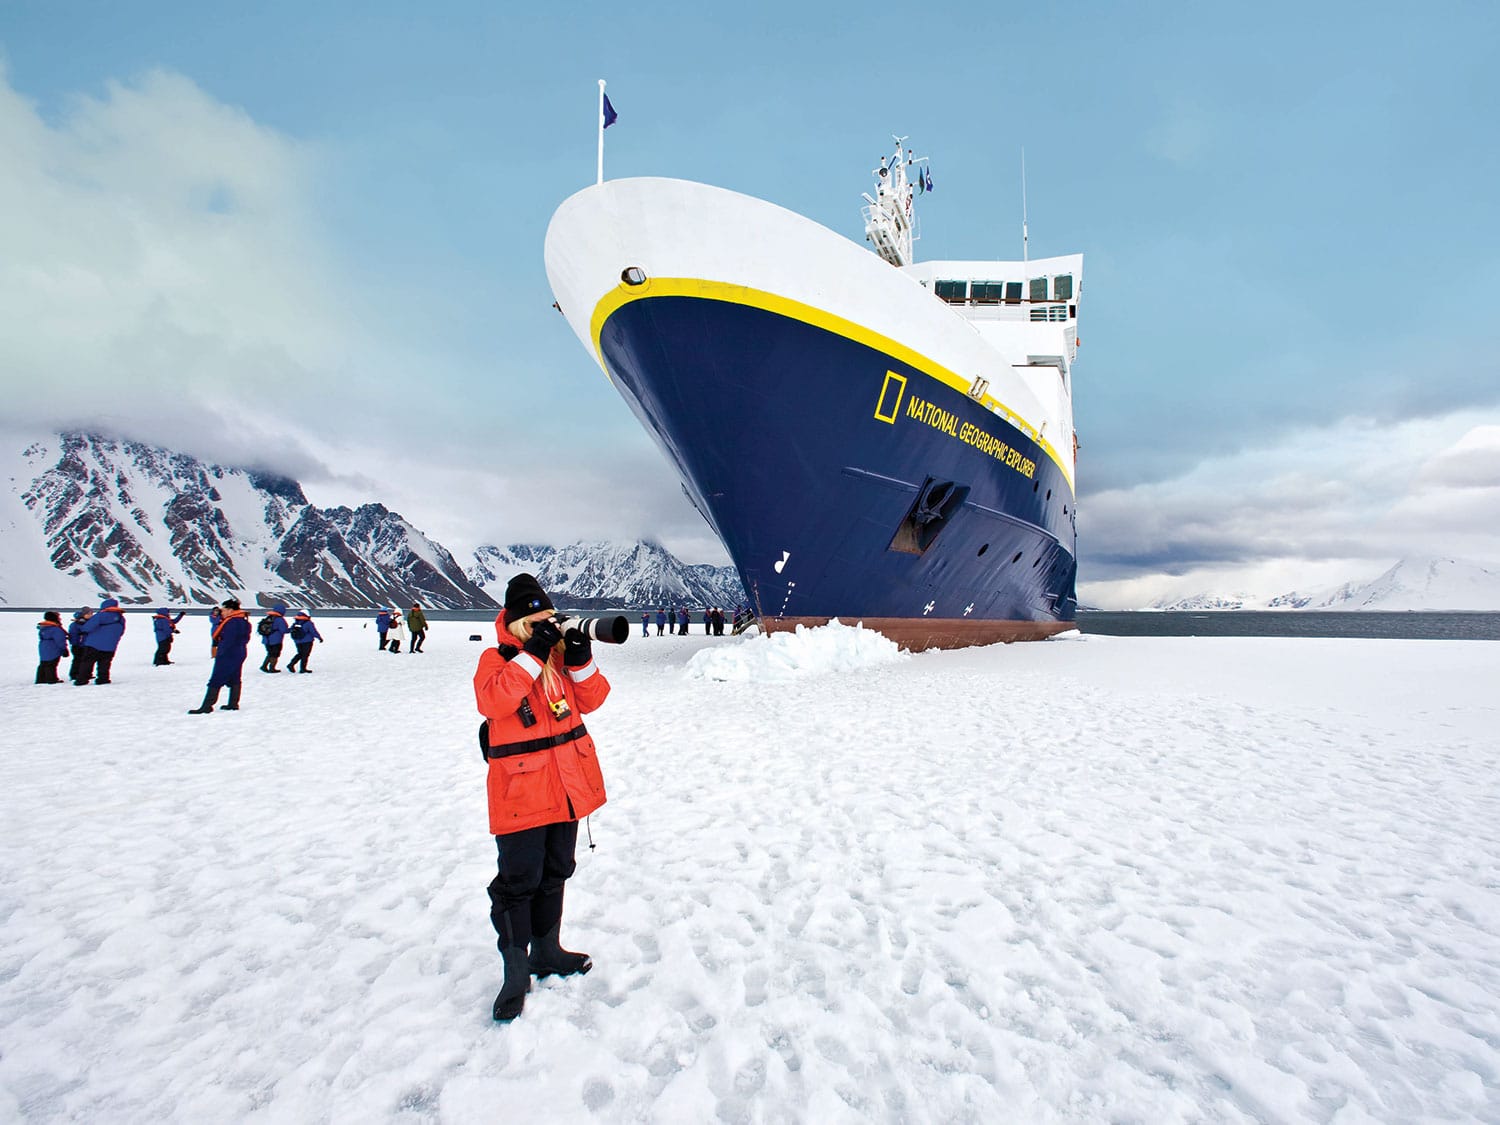 The National Geographic Explorer in Antarctica